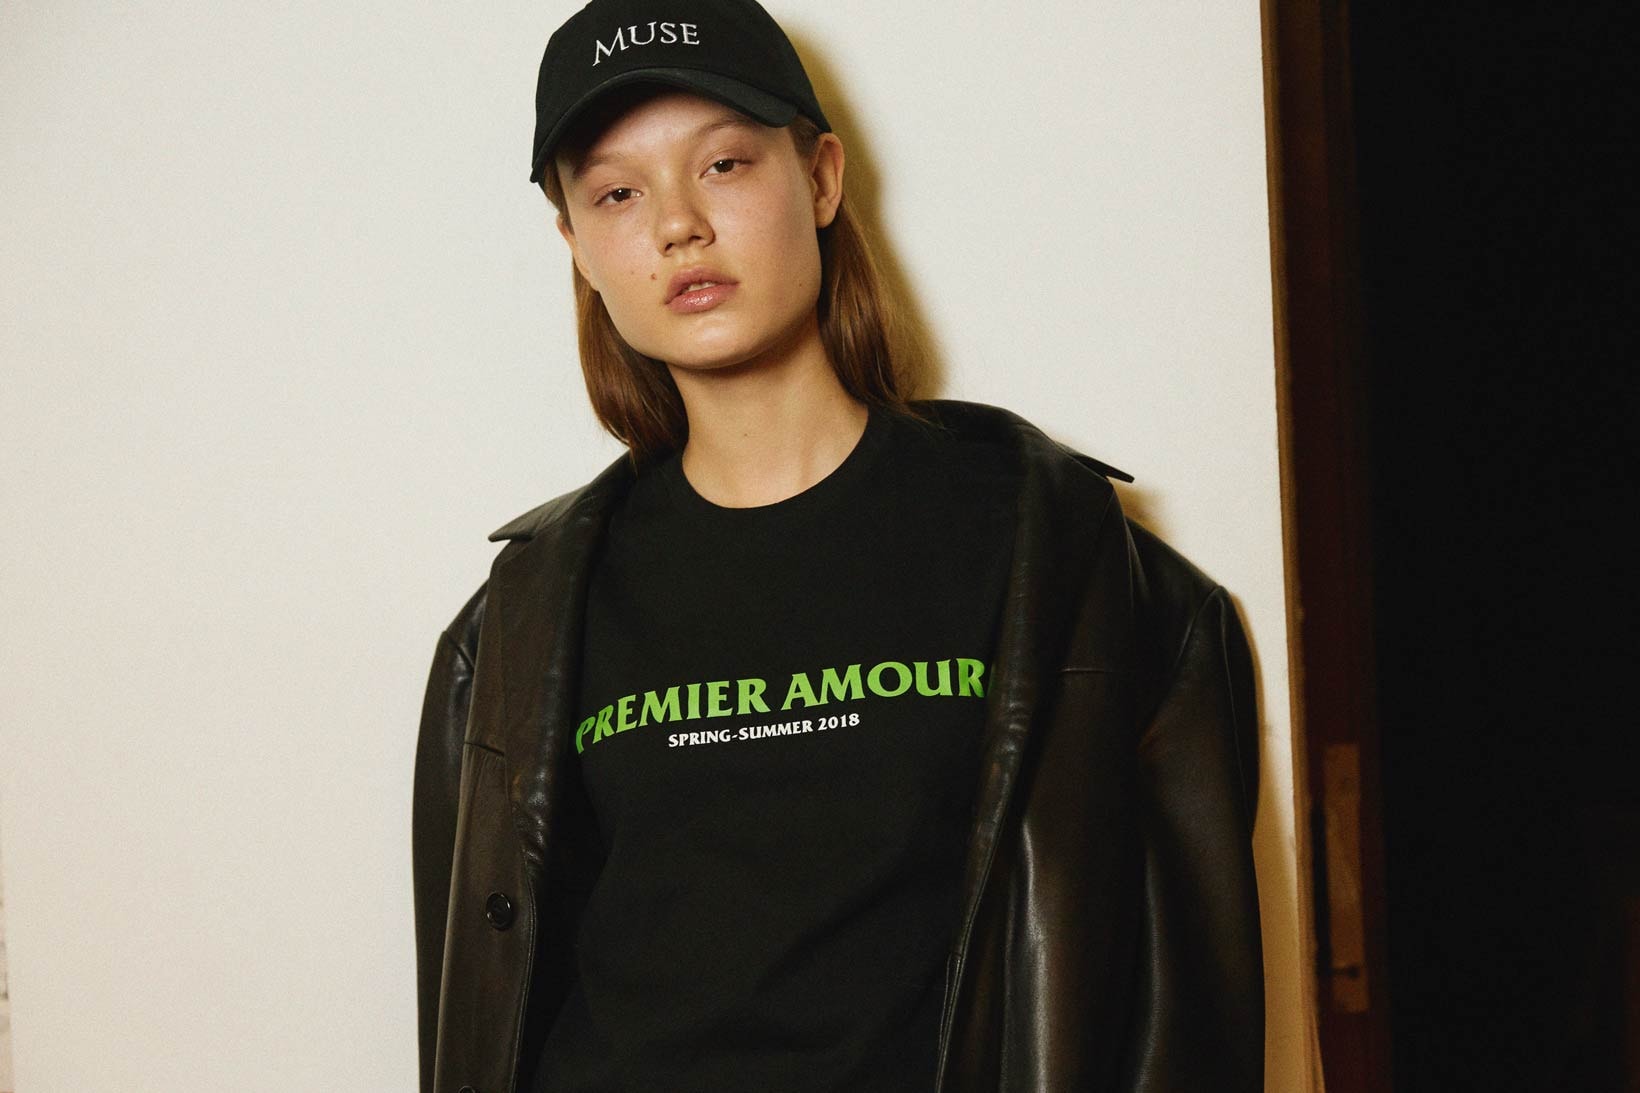 PREMIER AMOUR Spring/Summer 2018 Lookbook Muse Hat Graphic T-Shirt Green Black